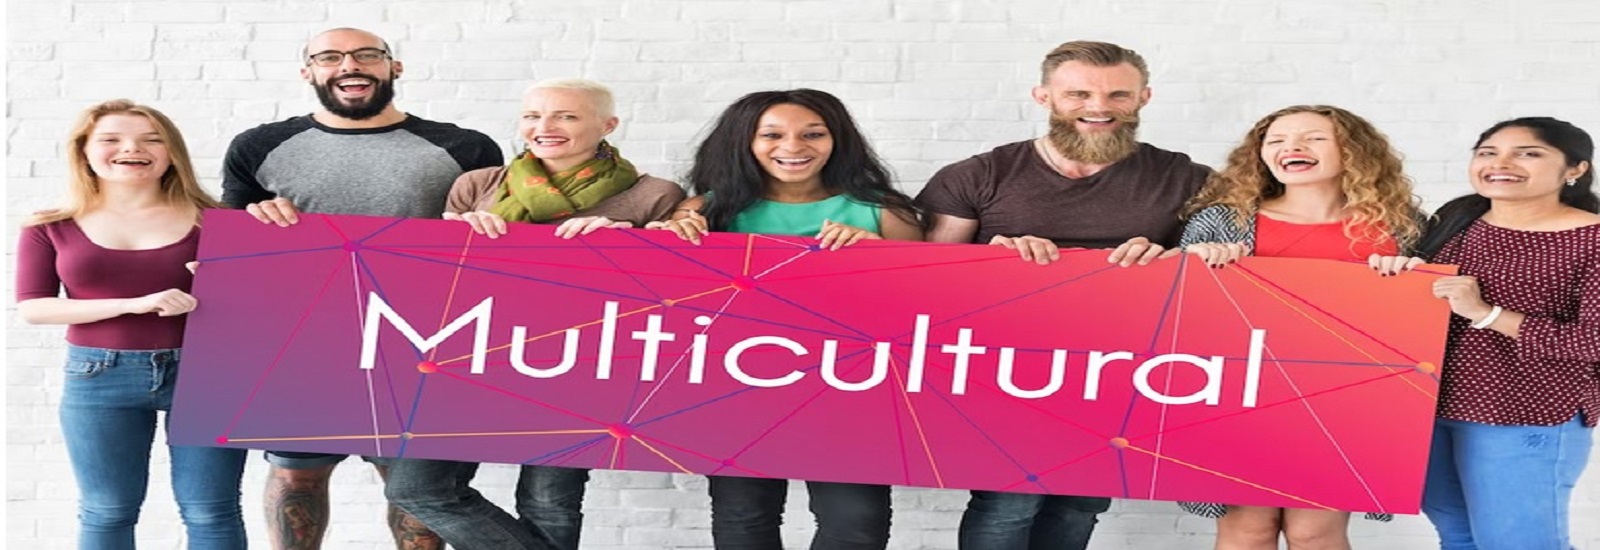 Multiculture awareness and connection